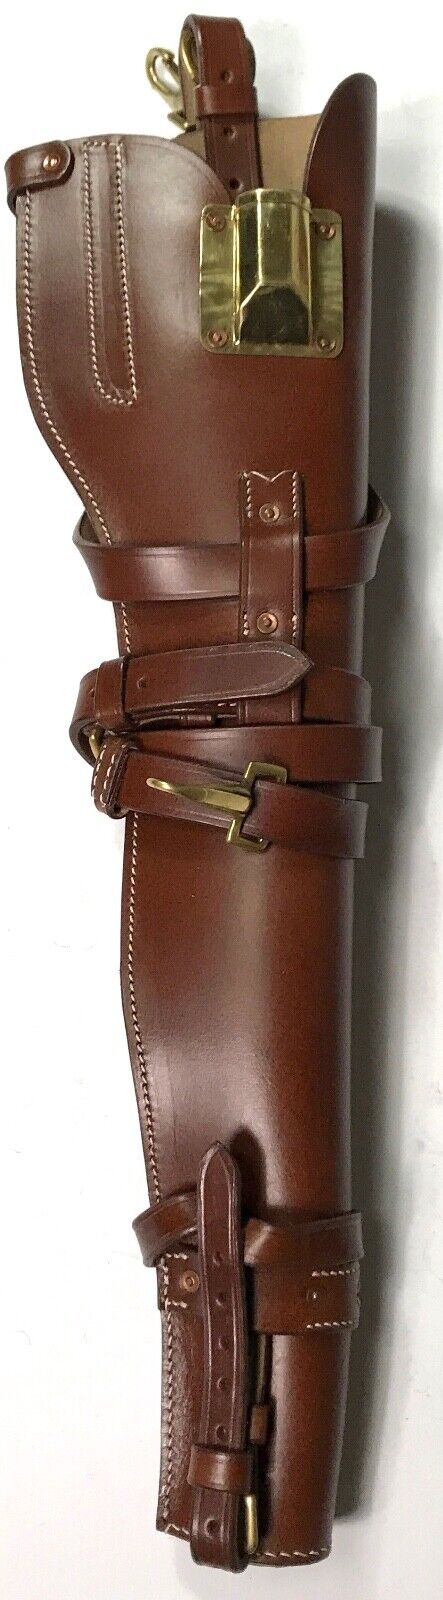  WWII US M1 CARBINE RIFLE LEATHER CARRY SCABBARD